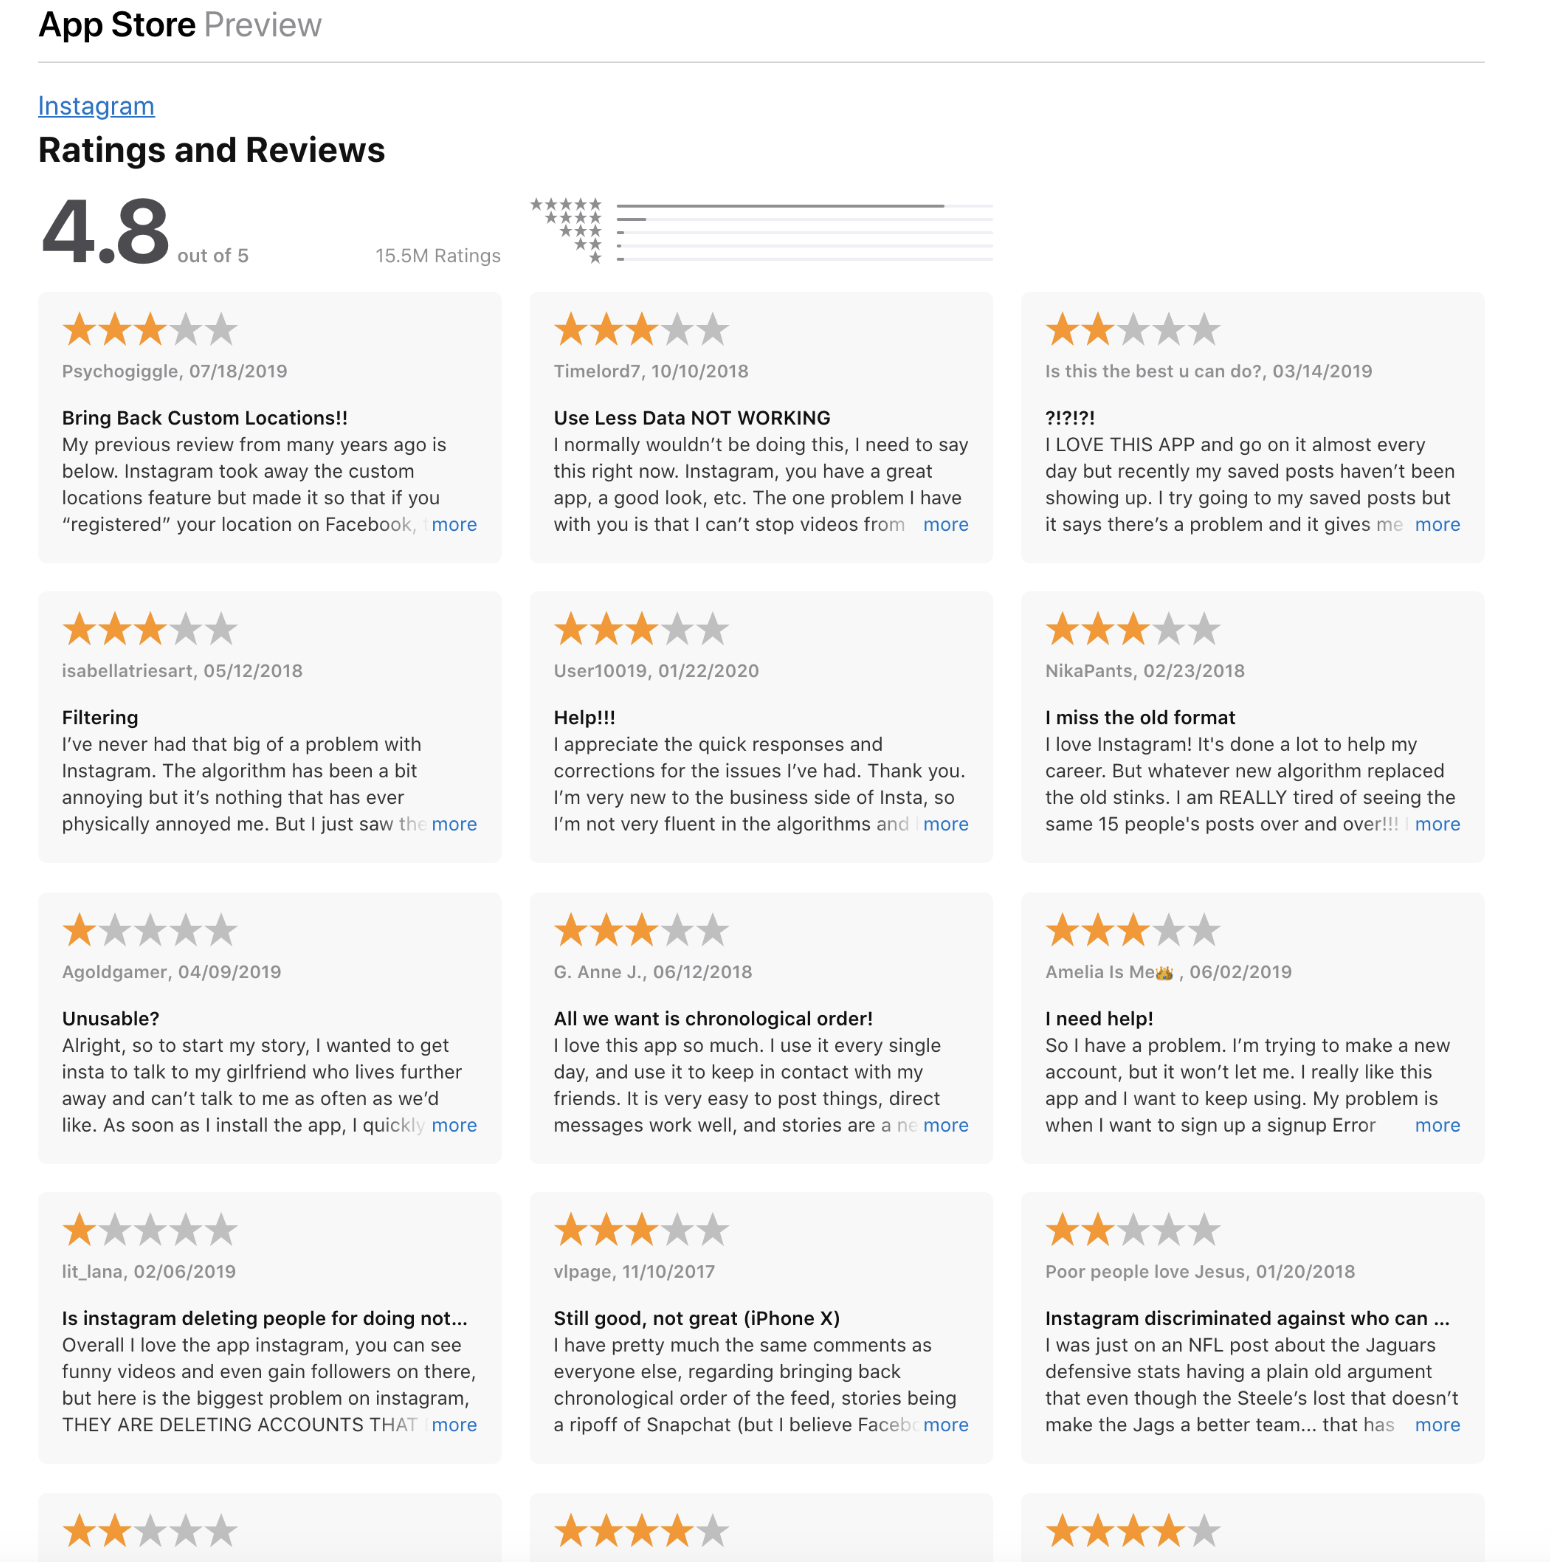 app store preview ratings and reviews